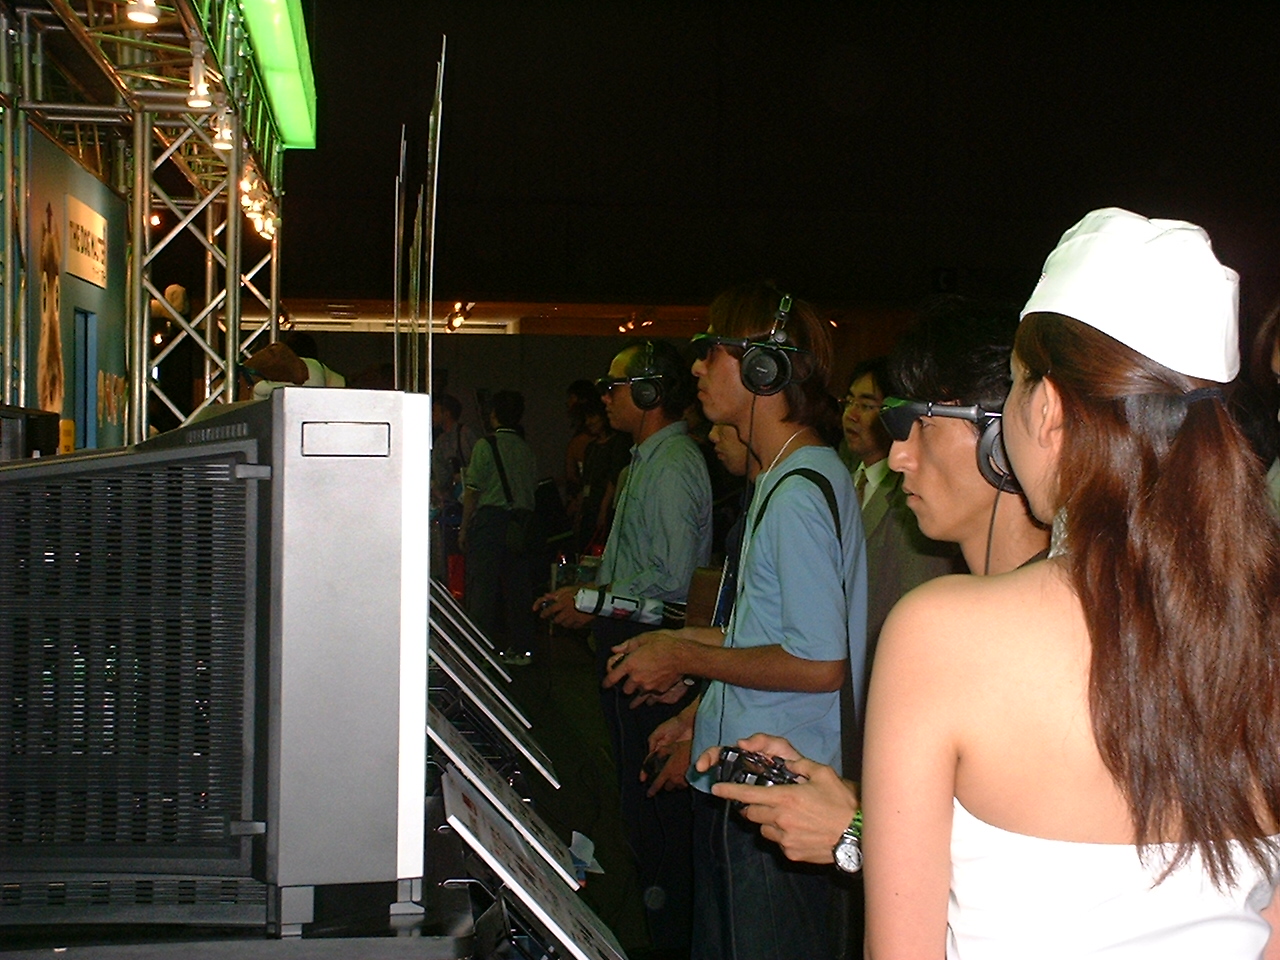 a sideview of the man playing shows the head mounted display.